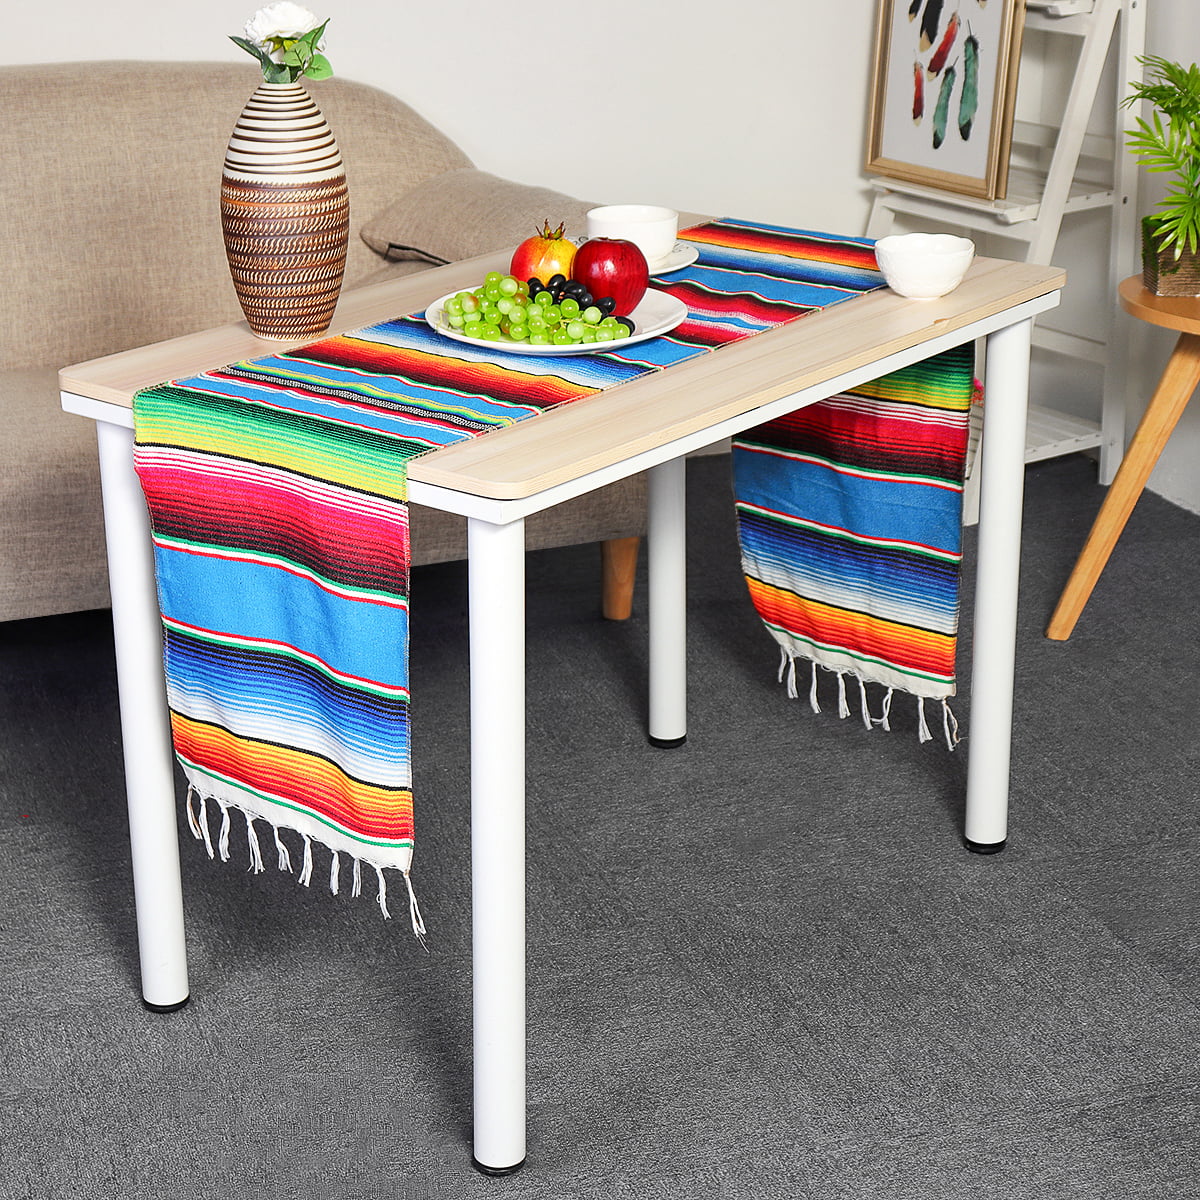 Cotton Weave Washable Dining Runners Home x KEREDA Mexican Style Table Runner